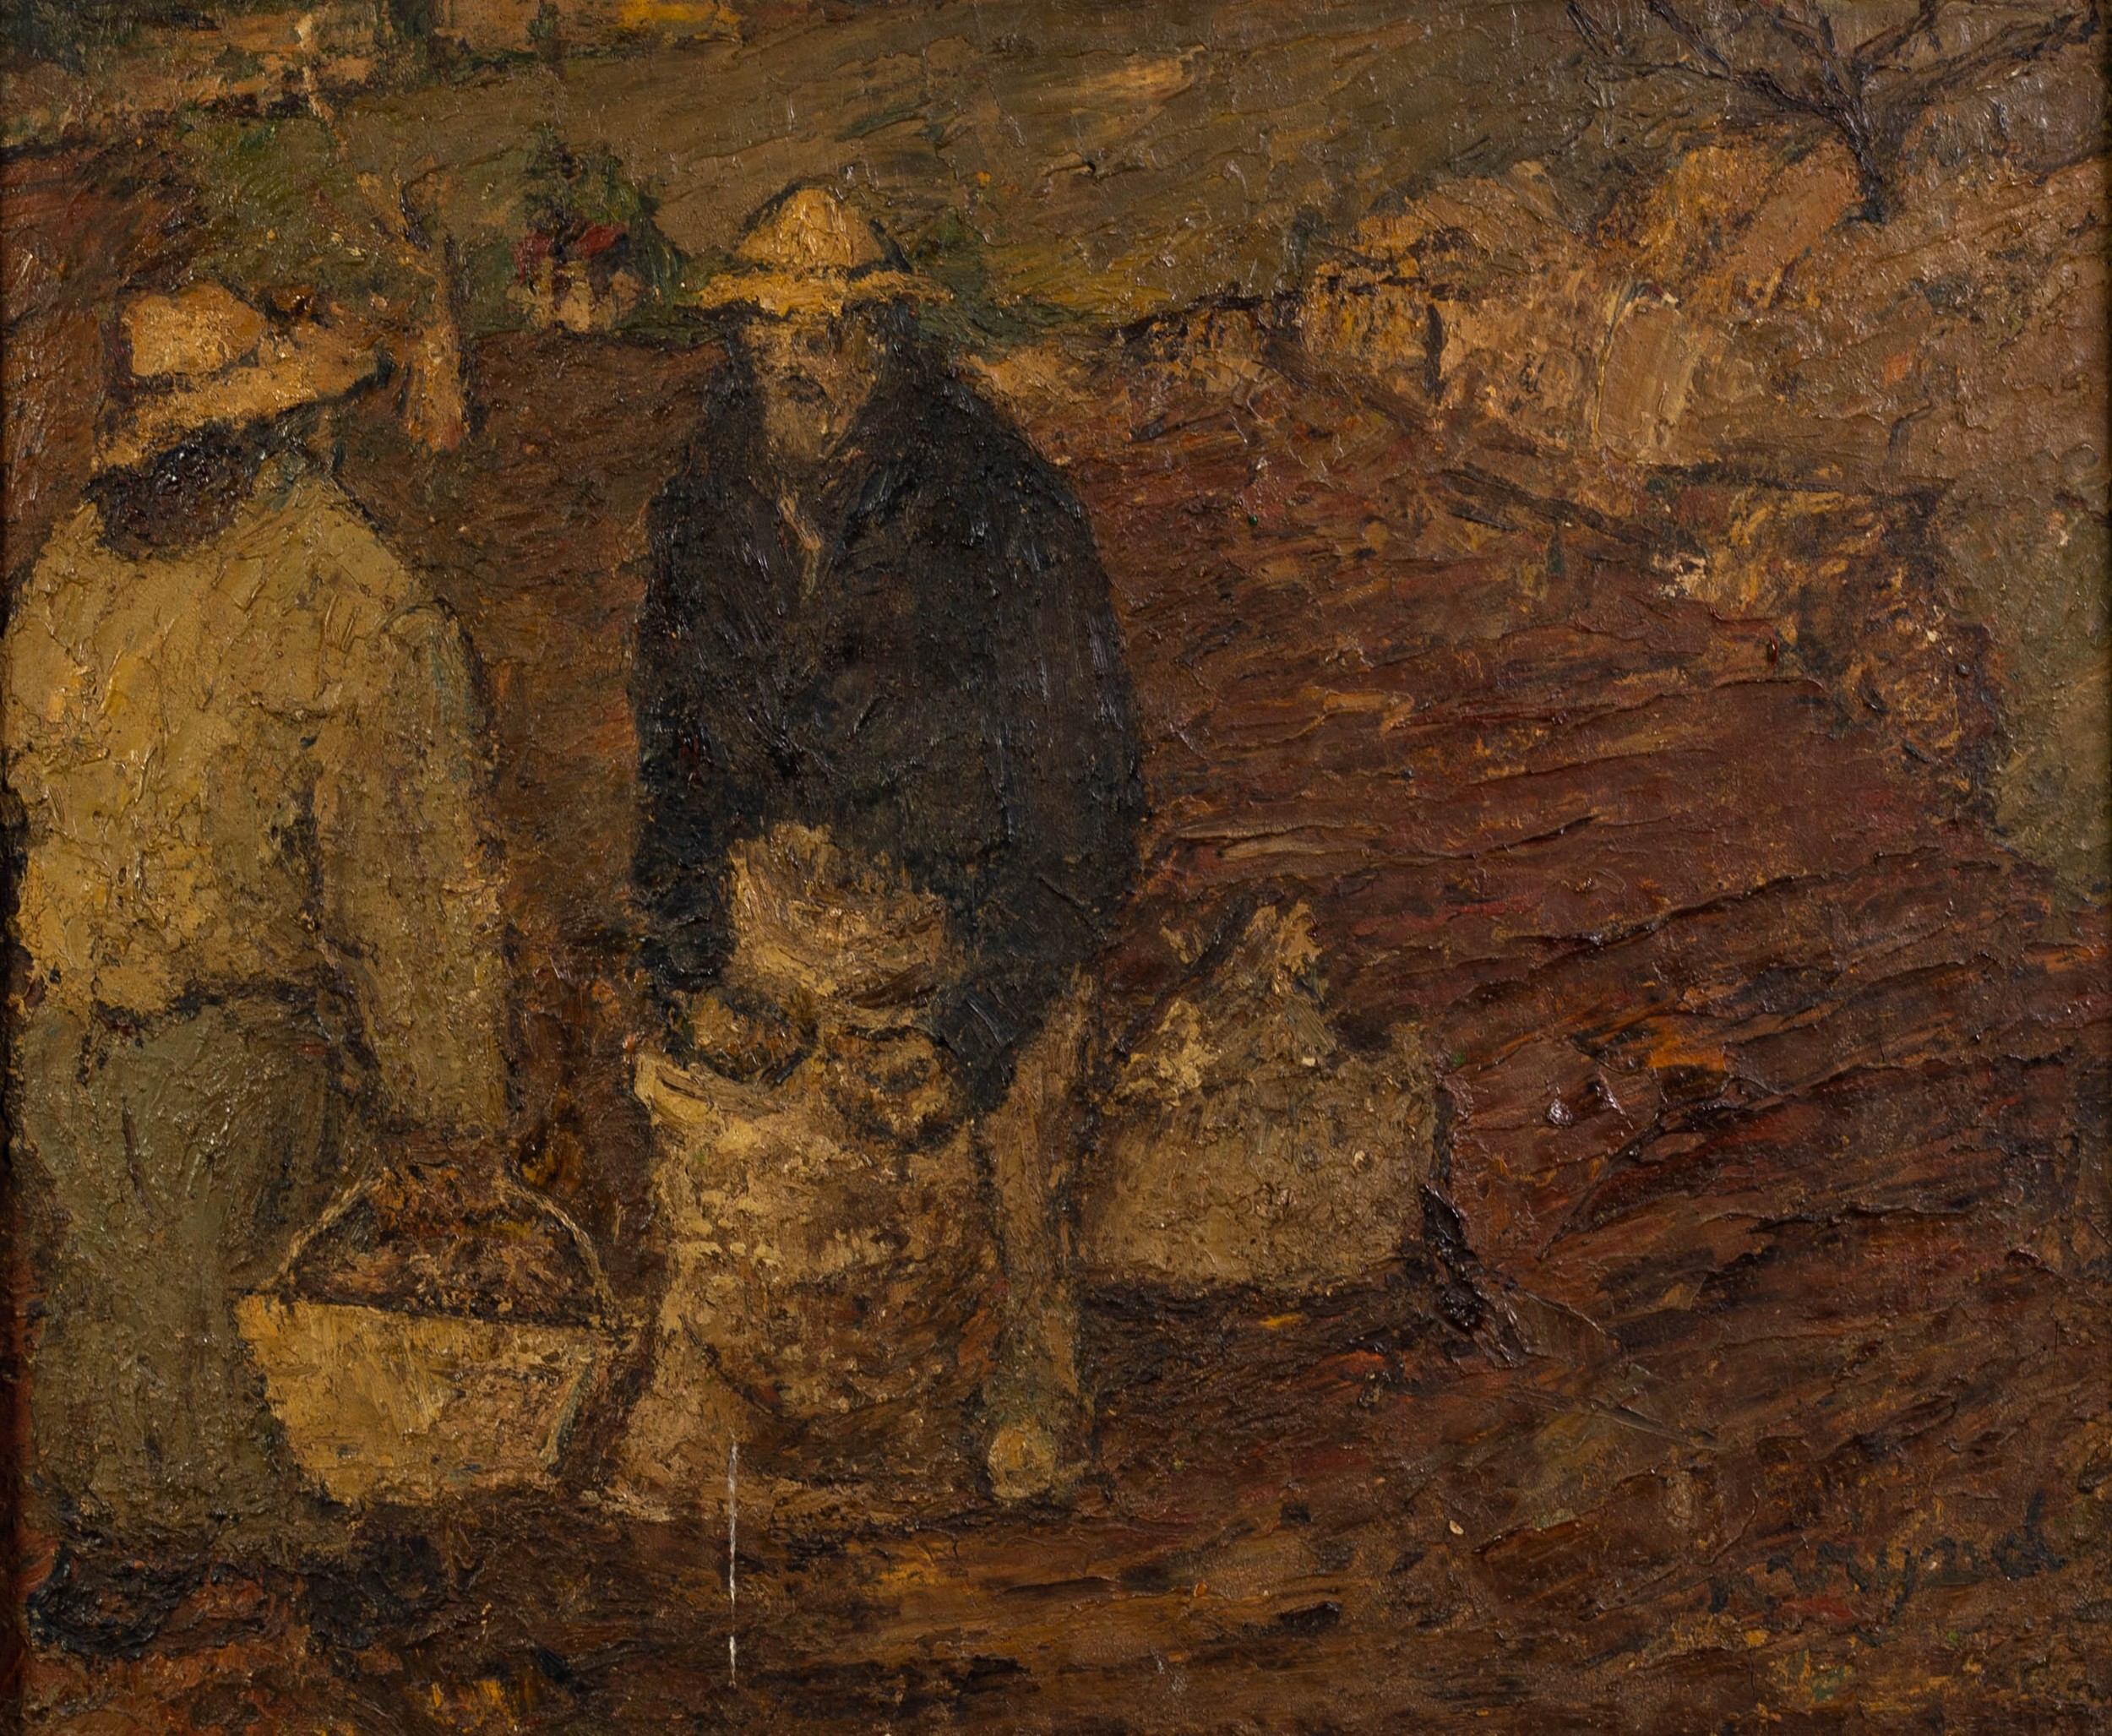 20th CENTURY FRENCH SCHOOL IMPASTO OIL PAINTING ON CANVAS Landscape with two farm workers in the